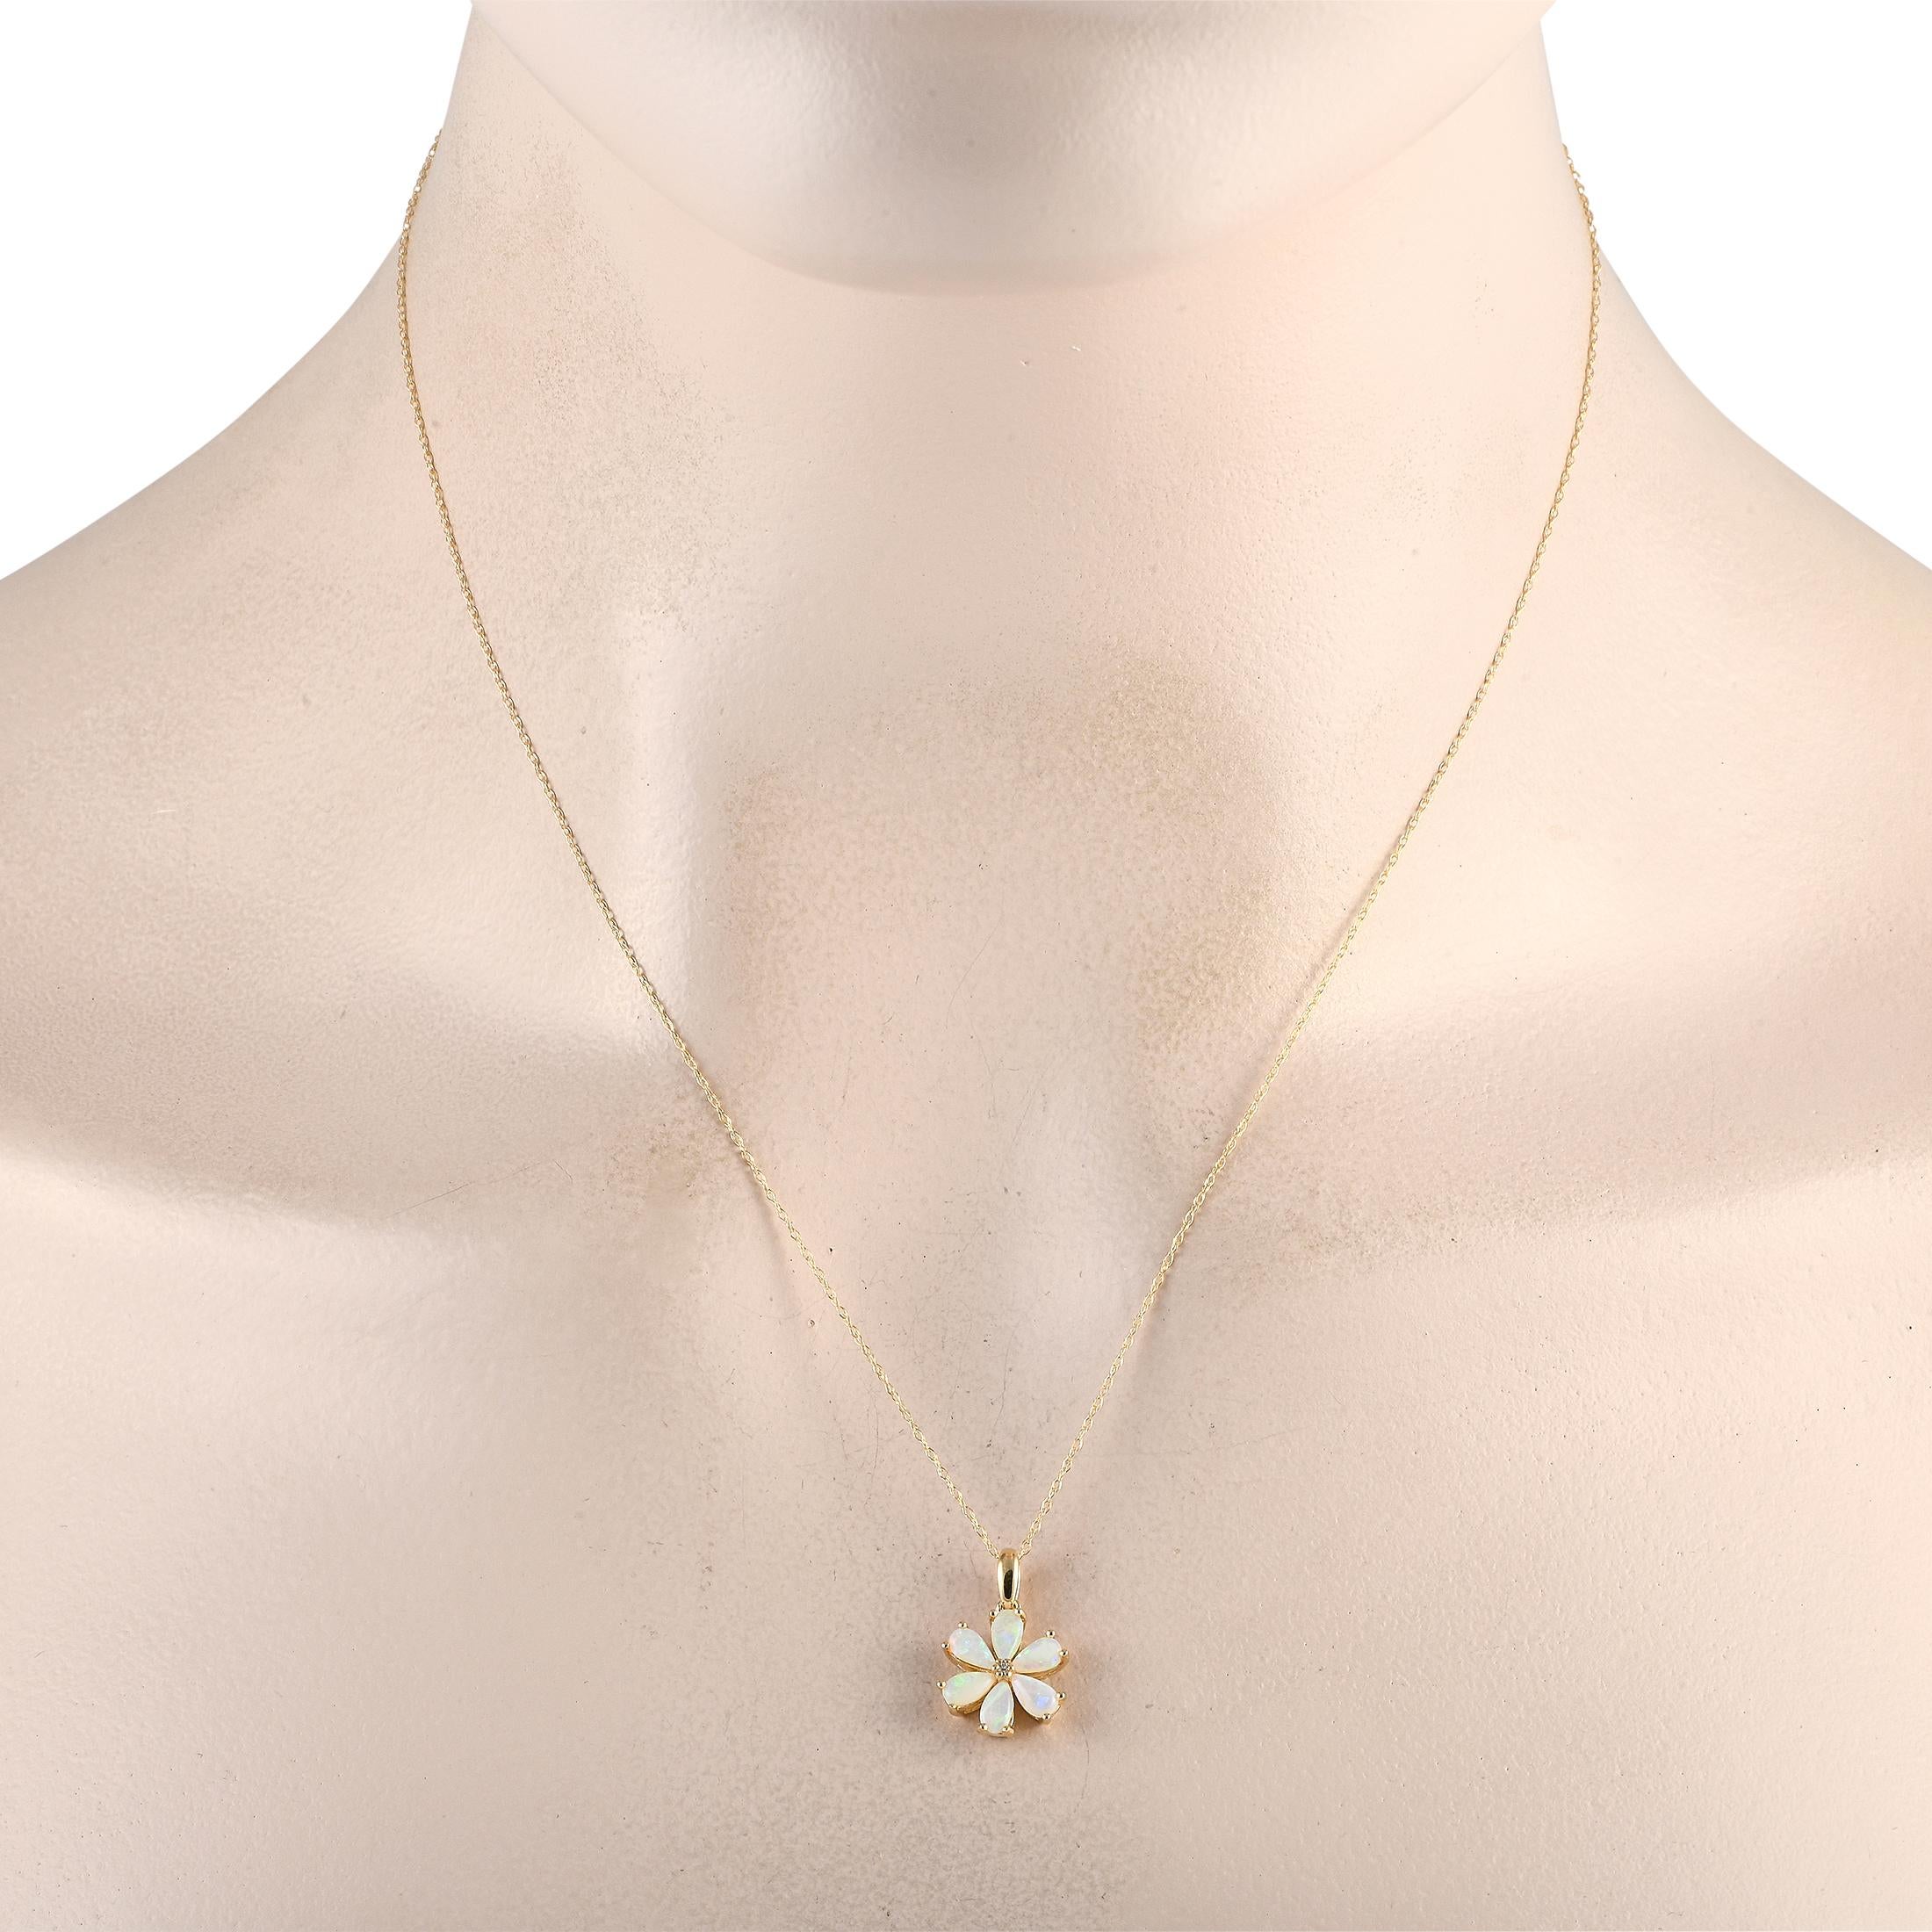 A floral shaped pendant makes a statement on this simple, elegant necklace. Crafted from 14K yellow gold, the pendant comes to life thanks to radiant opal petals and a single 0.01 carat diamond stone at the center. It measures 0.75 long by 0.50 wide